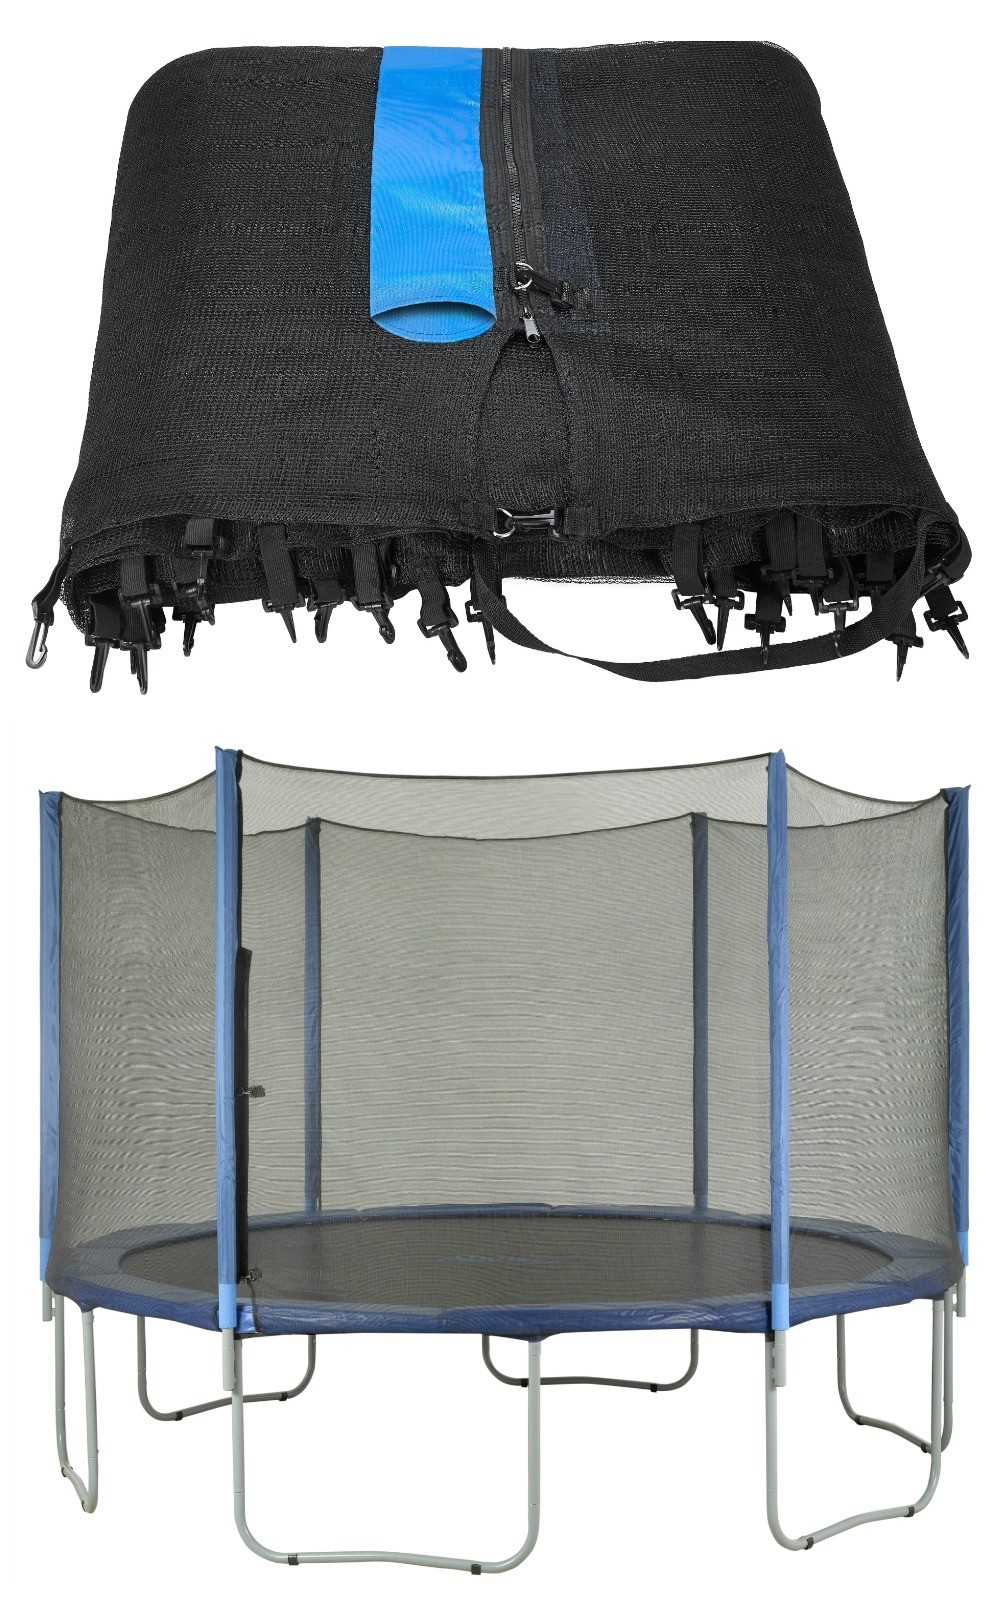 Trampoline Replacement Enclosure Safety Net, fits for 14 FT. Round Frames using 6 Straight Poles - Net Only